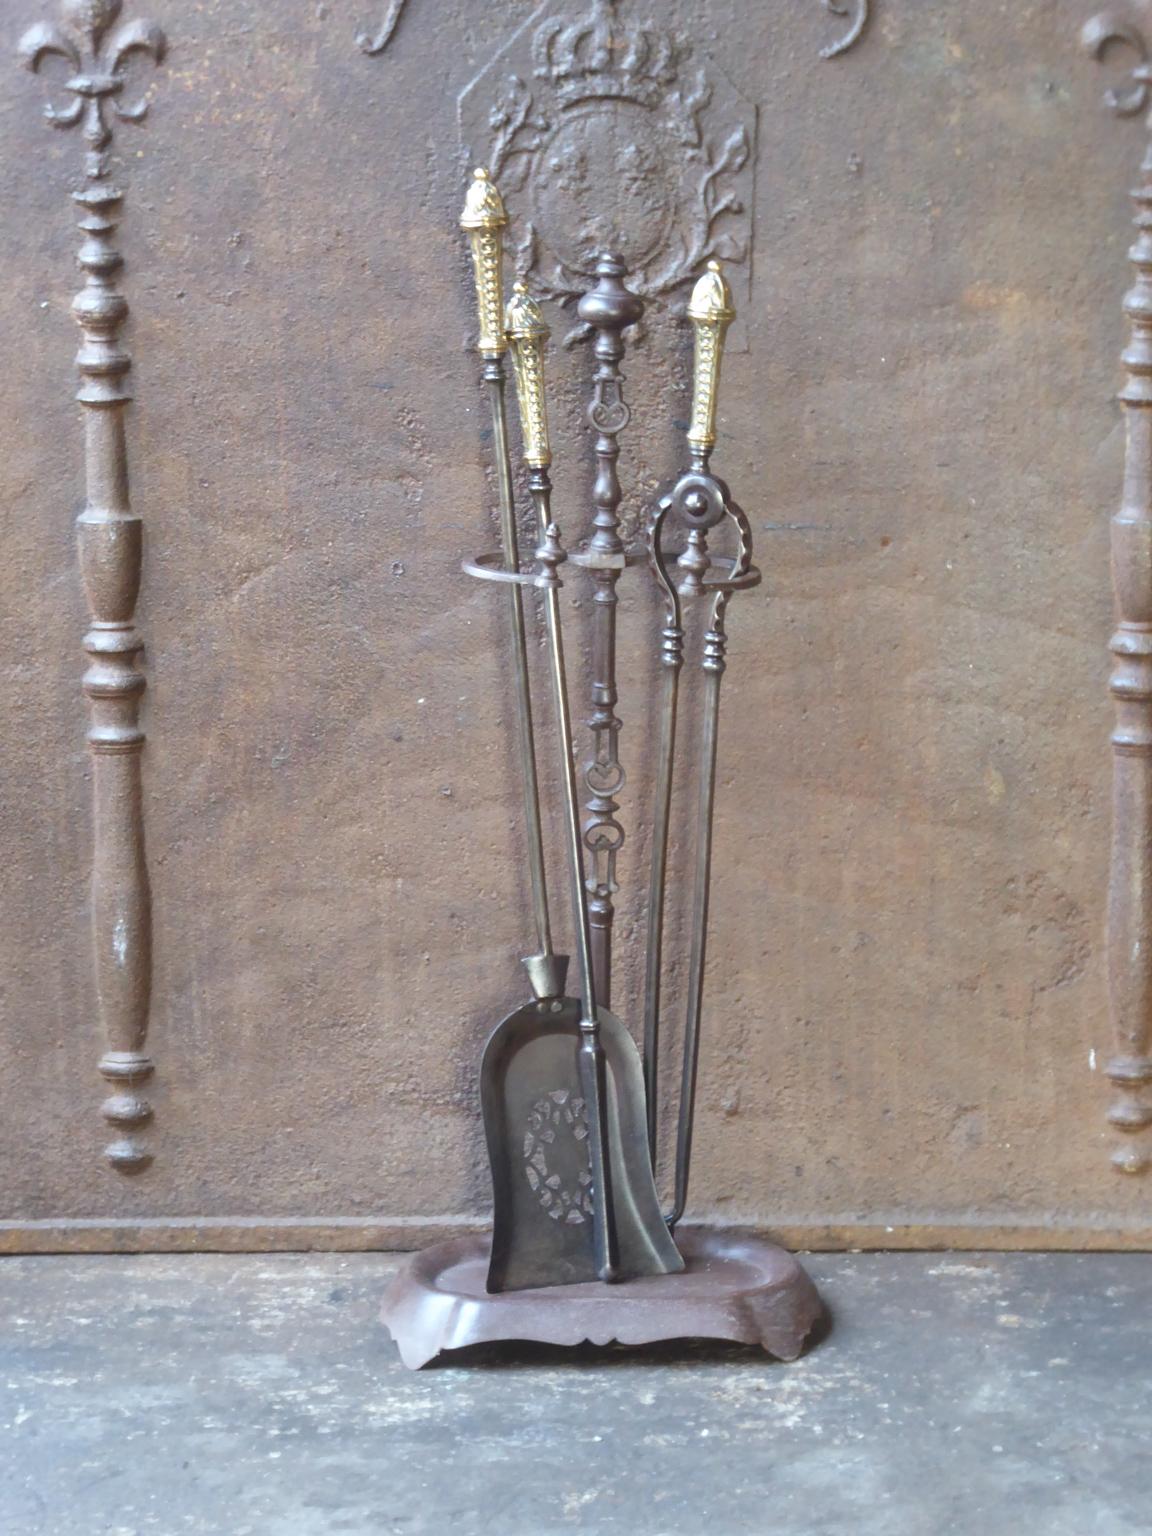 Beautiful set of three Georgian fireplace tools made of forged iron with polished brass handles and a wrought iron stand. Made in England, 18th-19th century. The fire tool set is in a good condition and is fully functional.








   